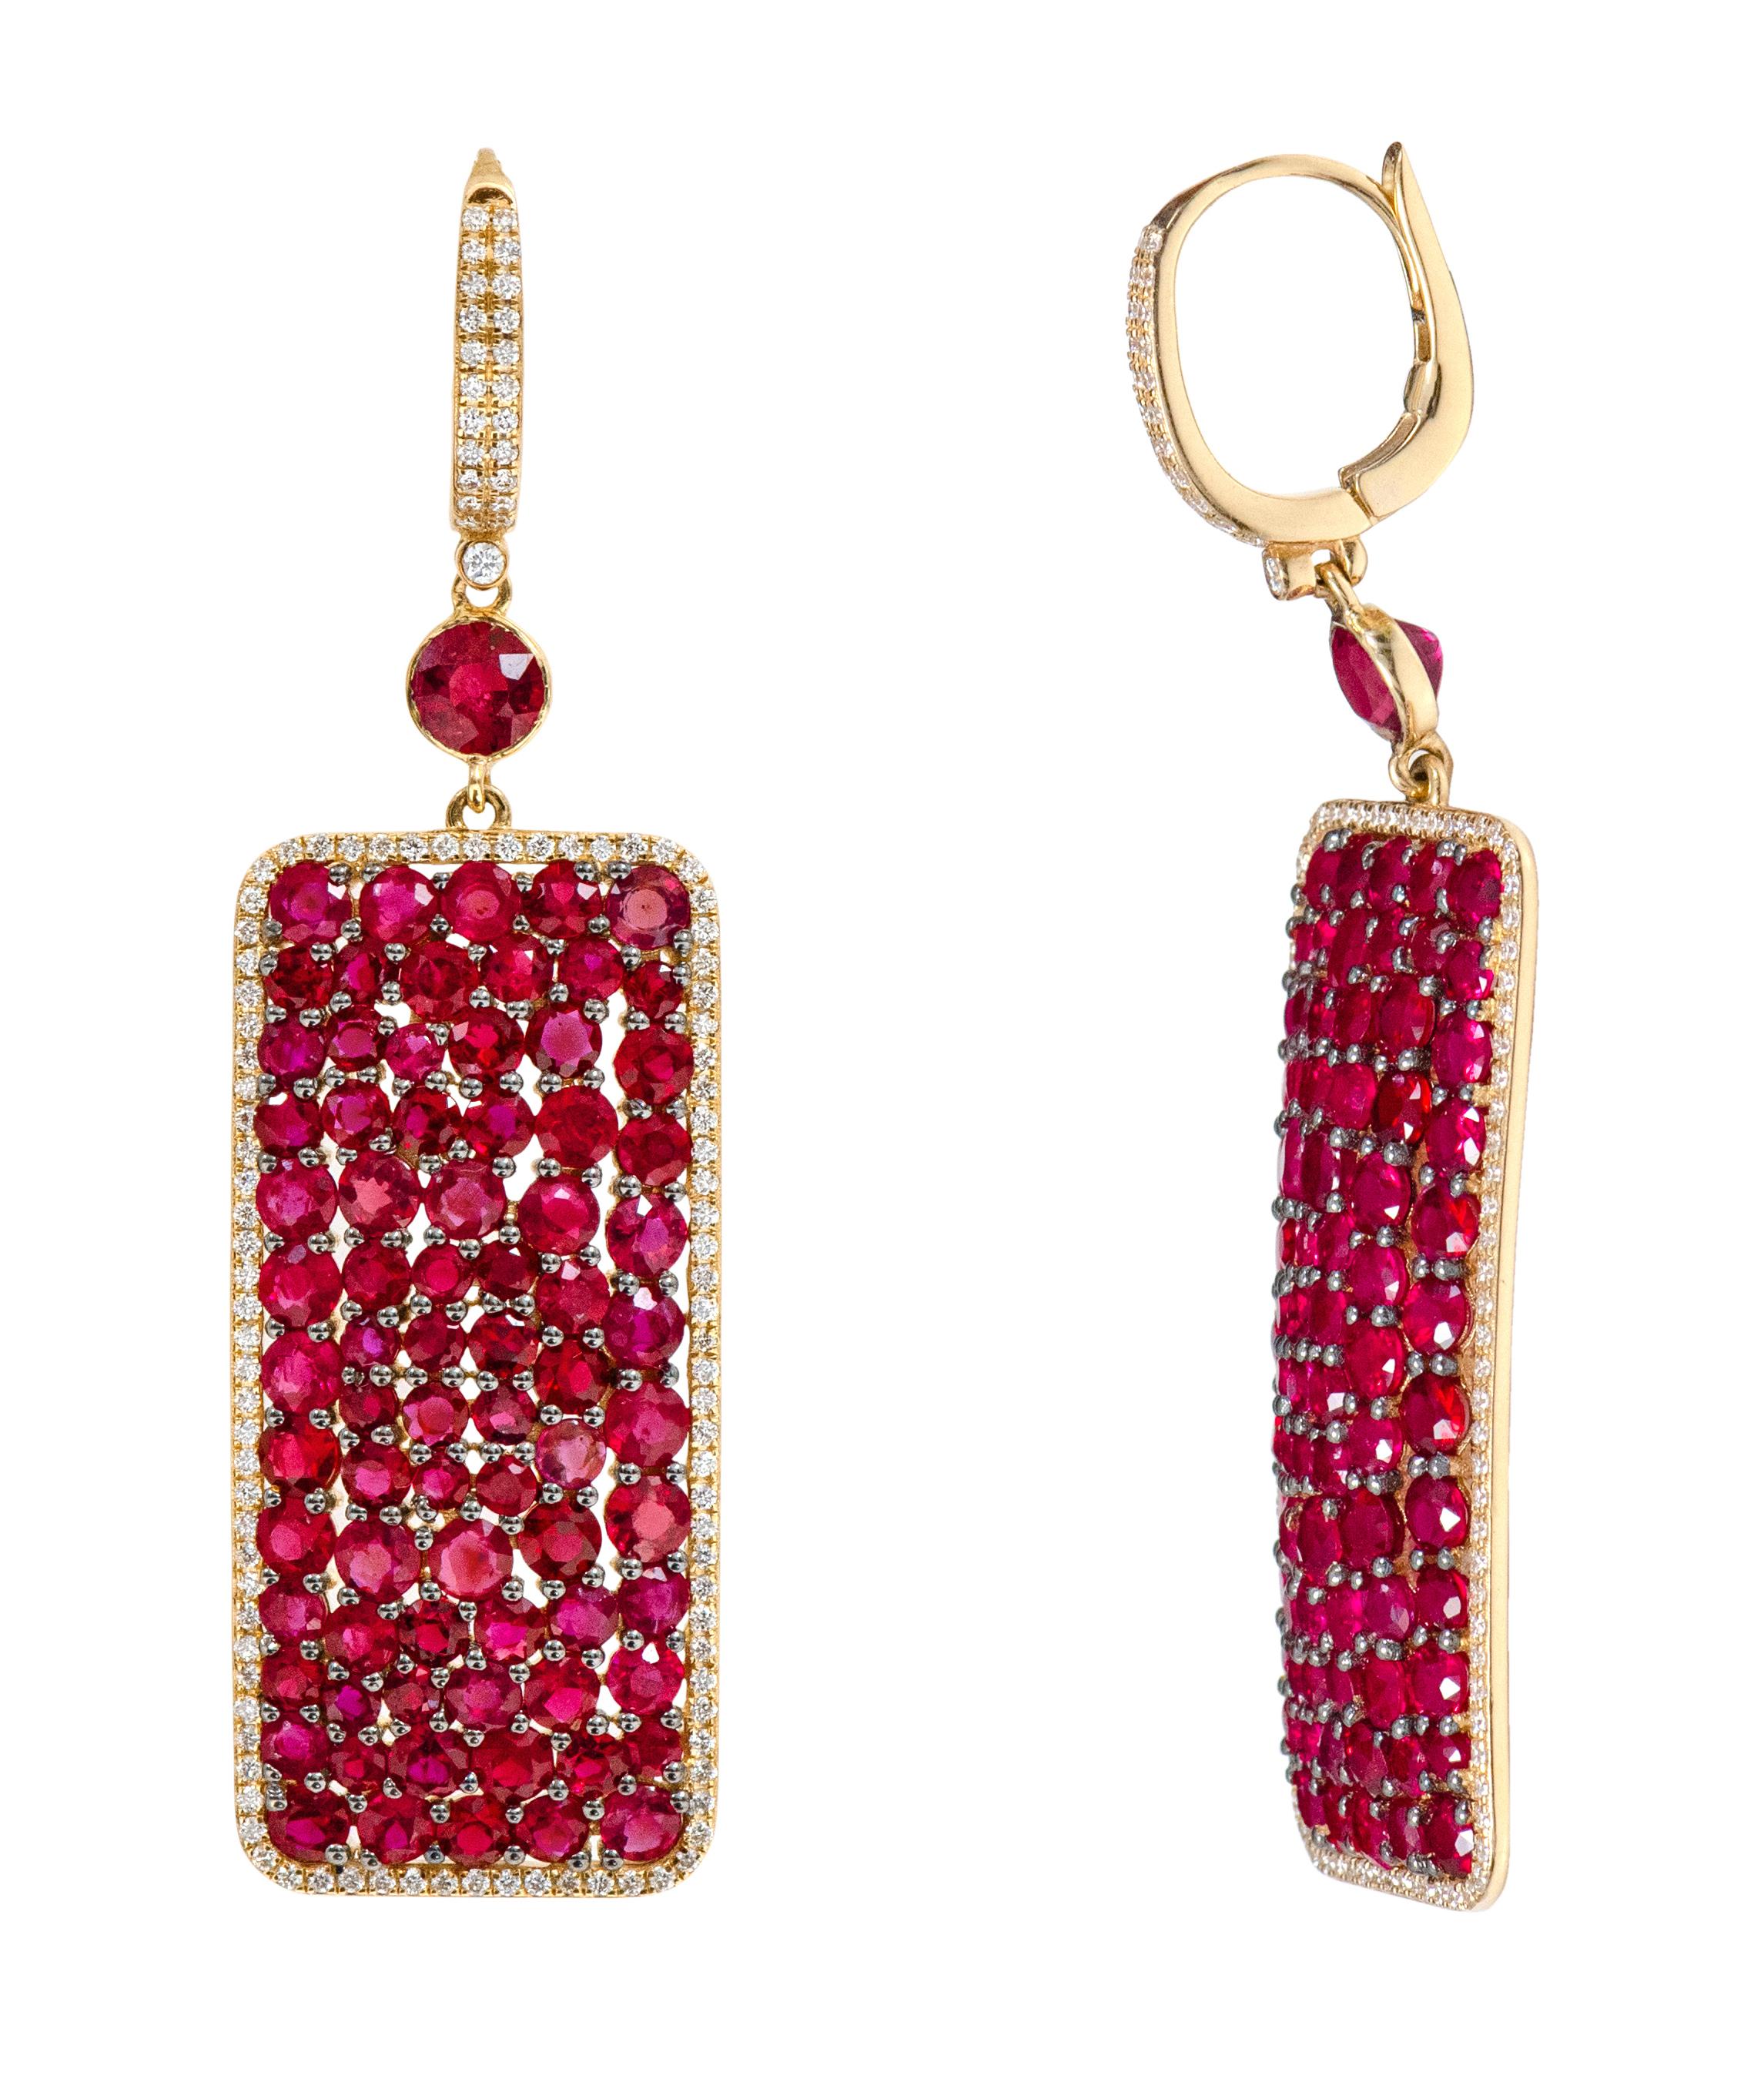 18 Karat Yellow Gold 16.35 Carat Ruby and Diamond Drop Earrings

This sensational pigeon blood ruby and diamond long earring is articulate. The beautiful composition of pave set mixed size round solitaire rubies form the rectangle shape of the